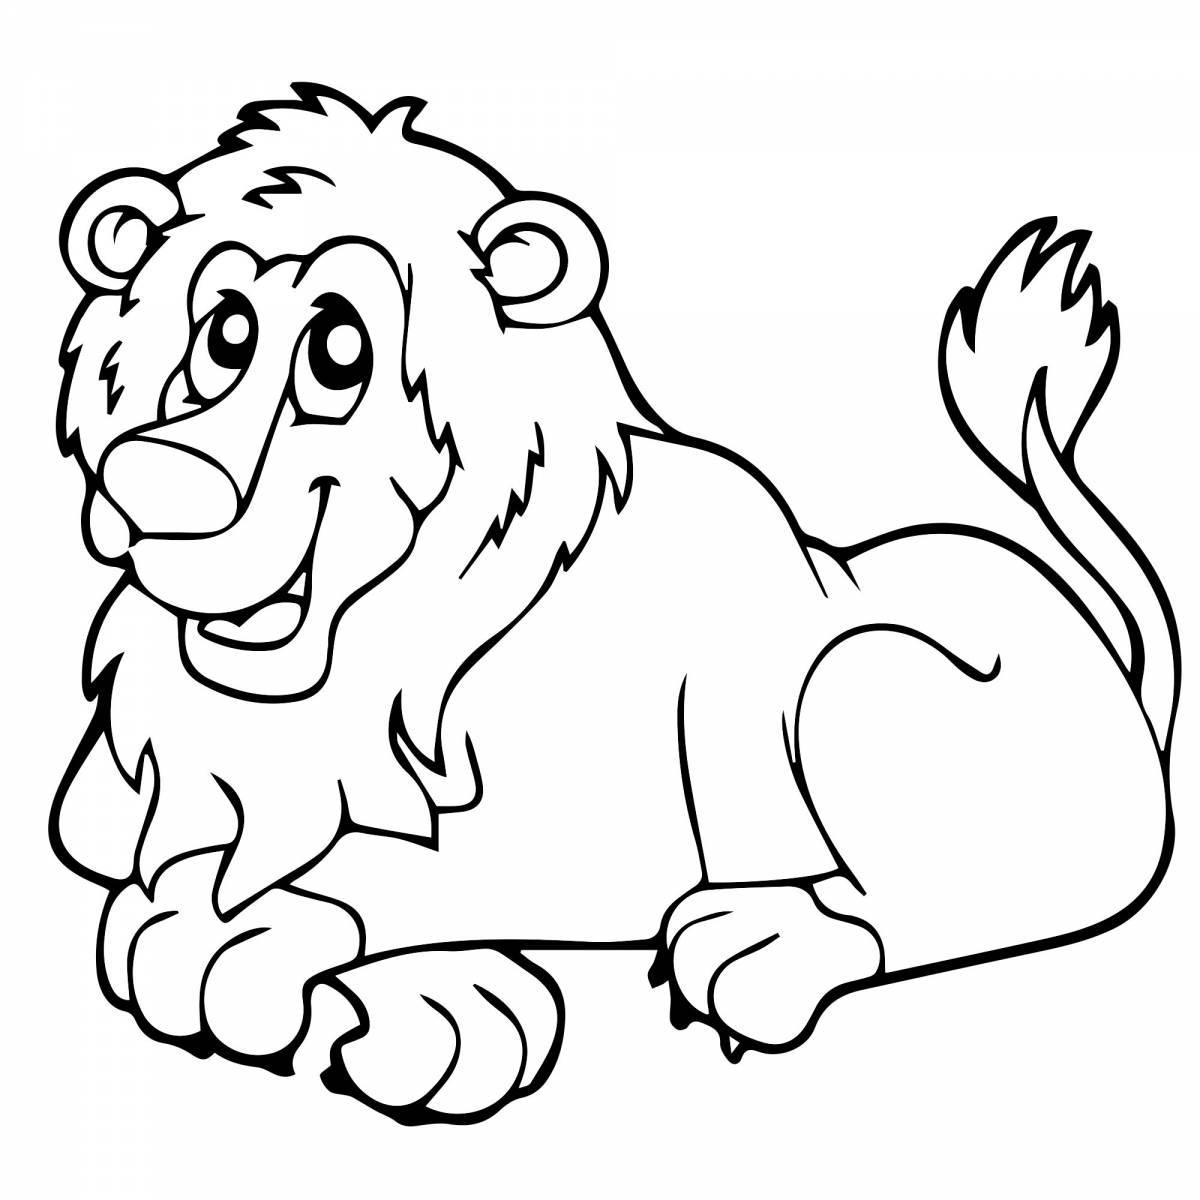 A striking lion coloring page